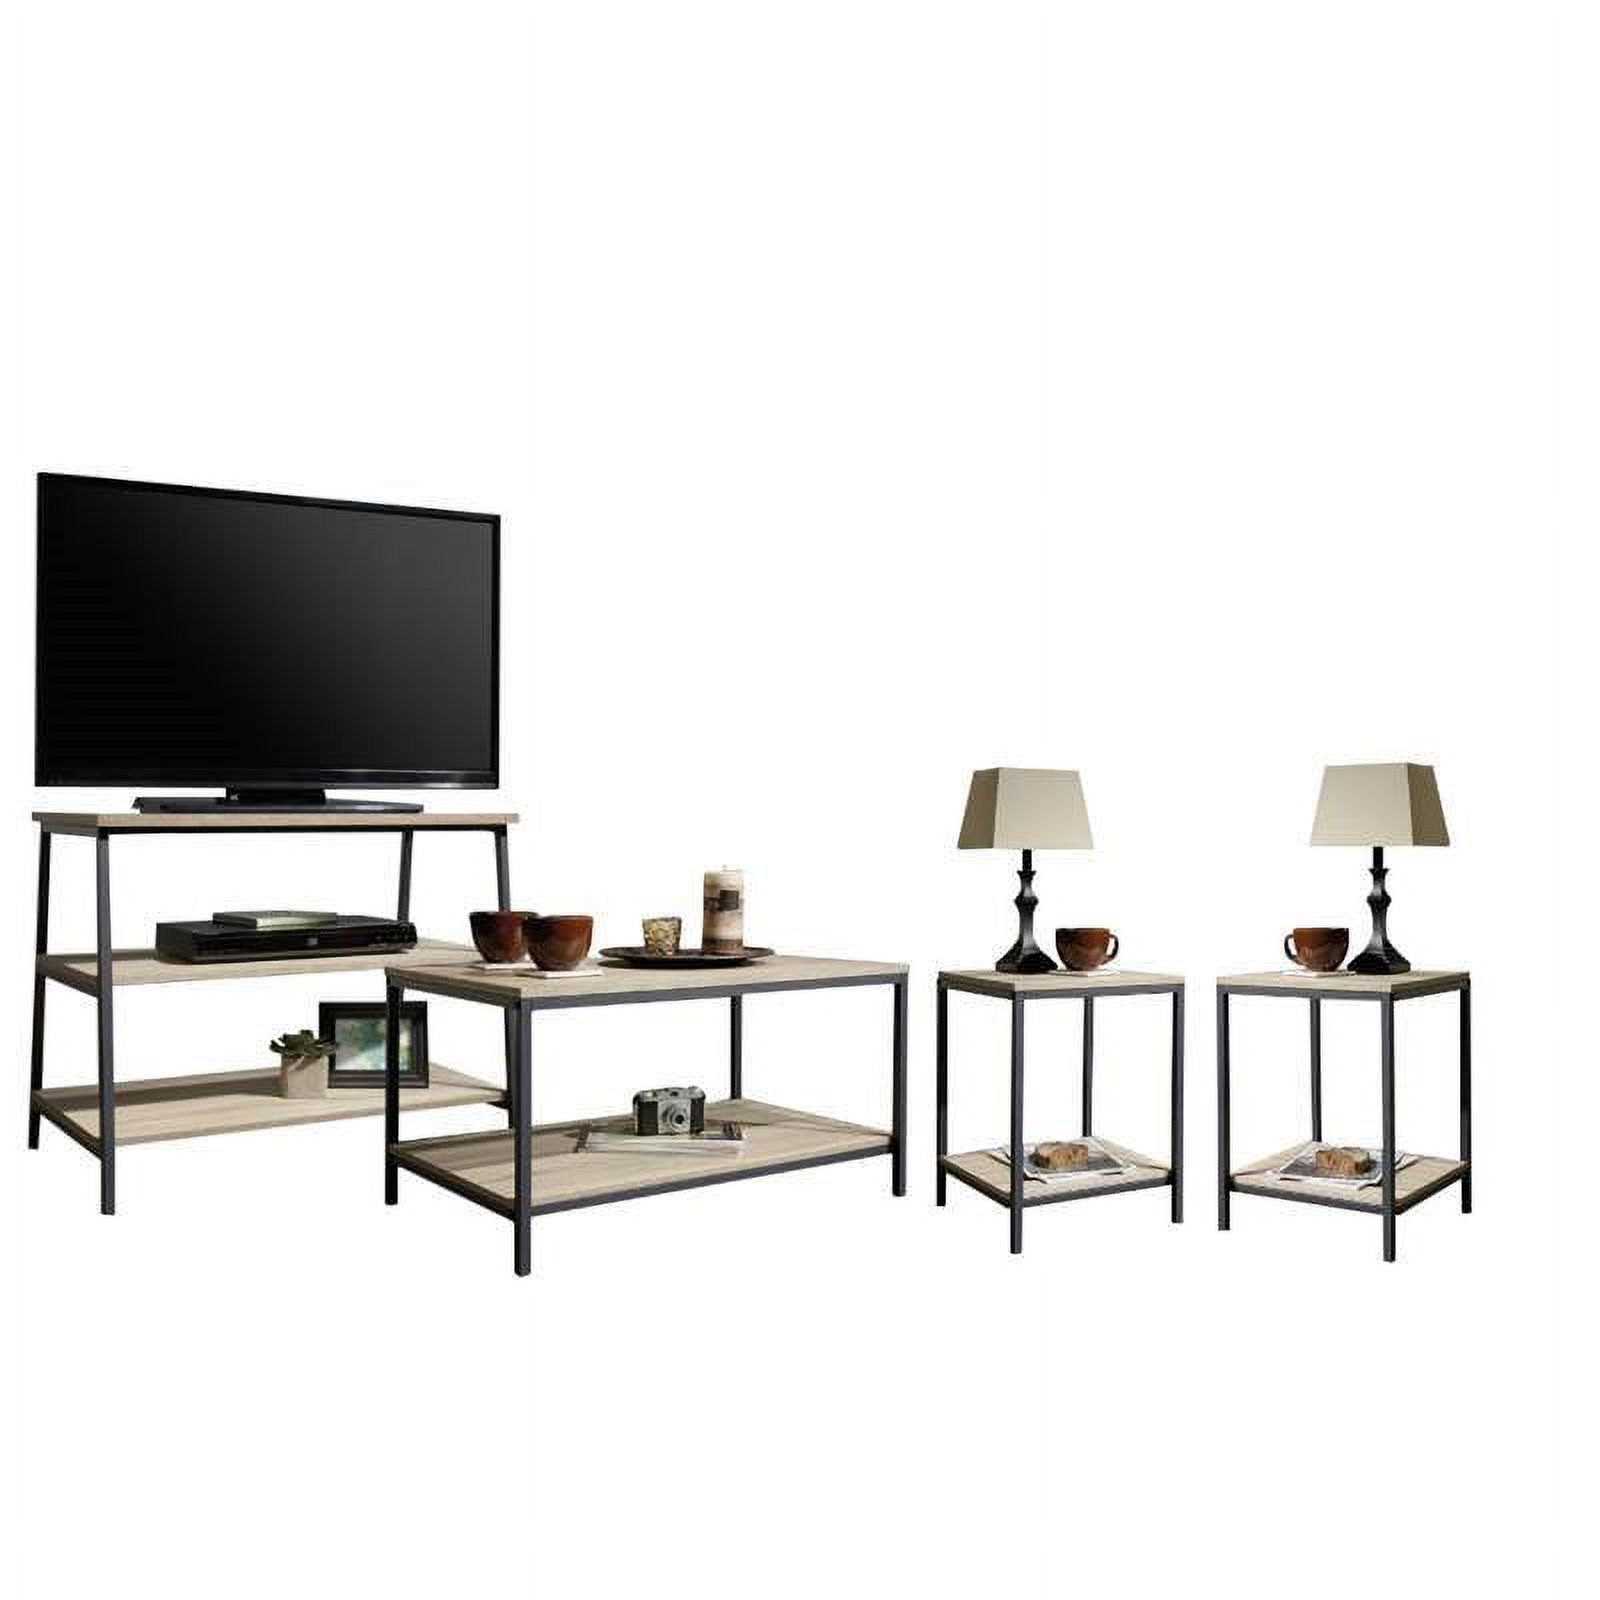 Home Square 4 Piece Living Room Set with Coffee Table and TV Stand with 2 Nightstand in Charter Oak and Dark Metal Accents - image 1 of 4